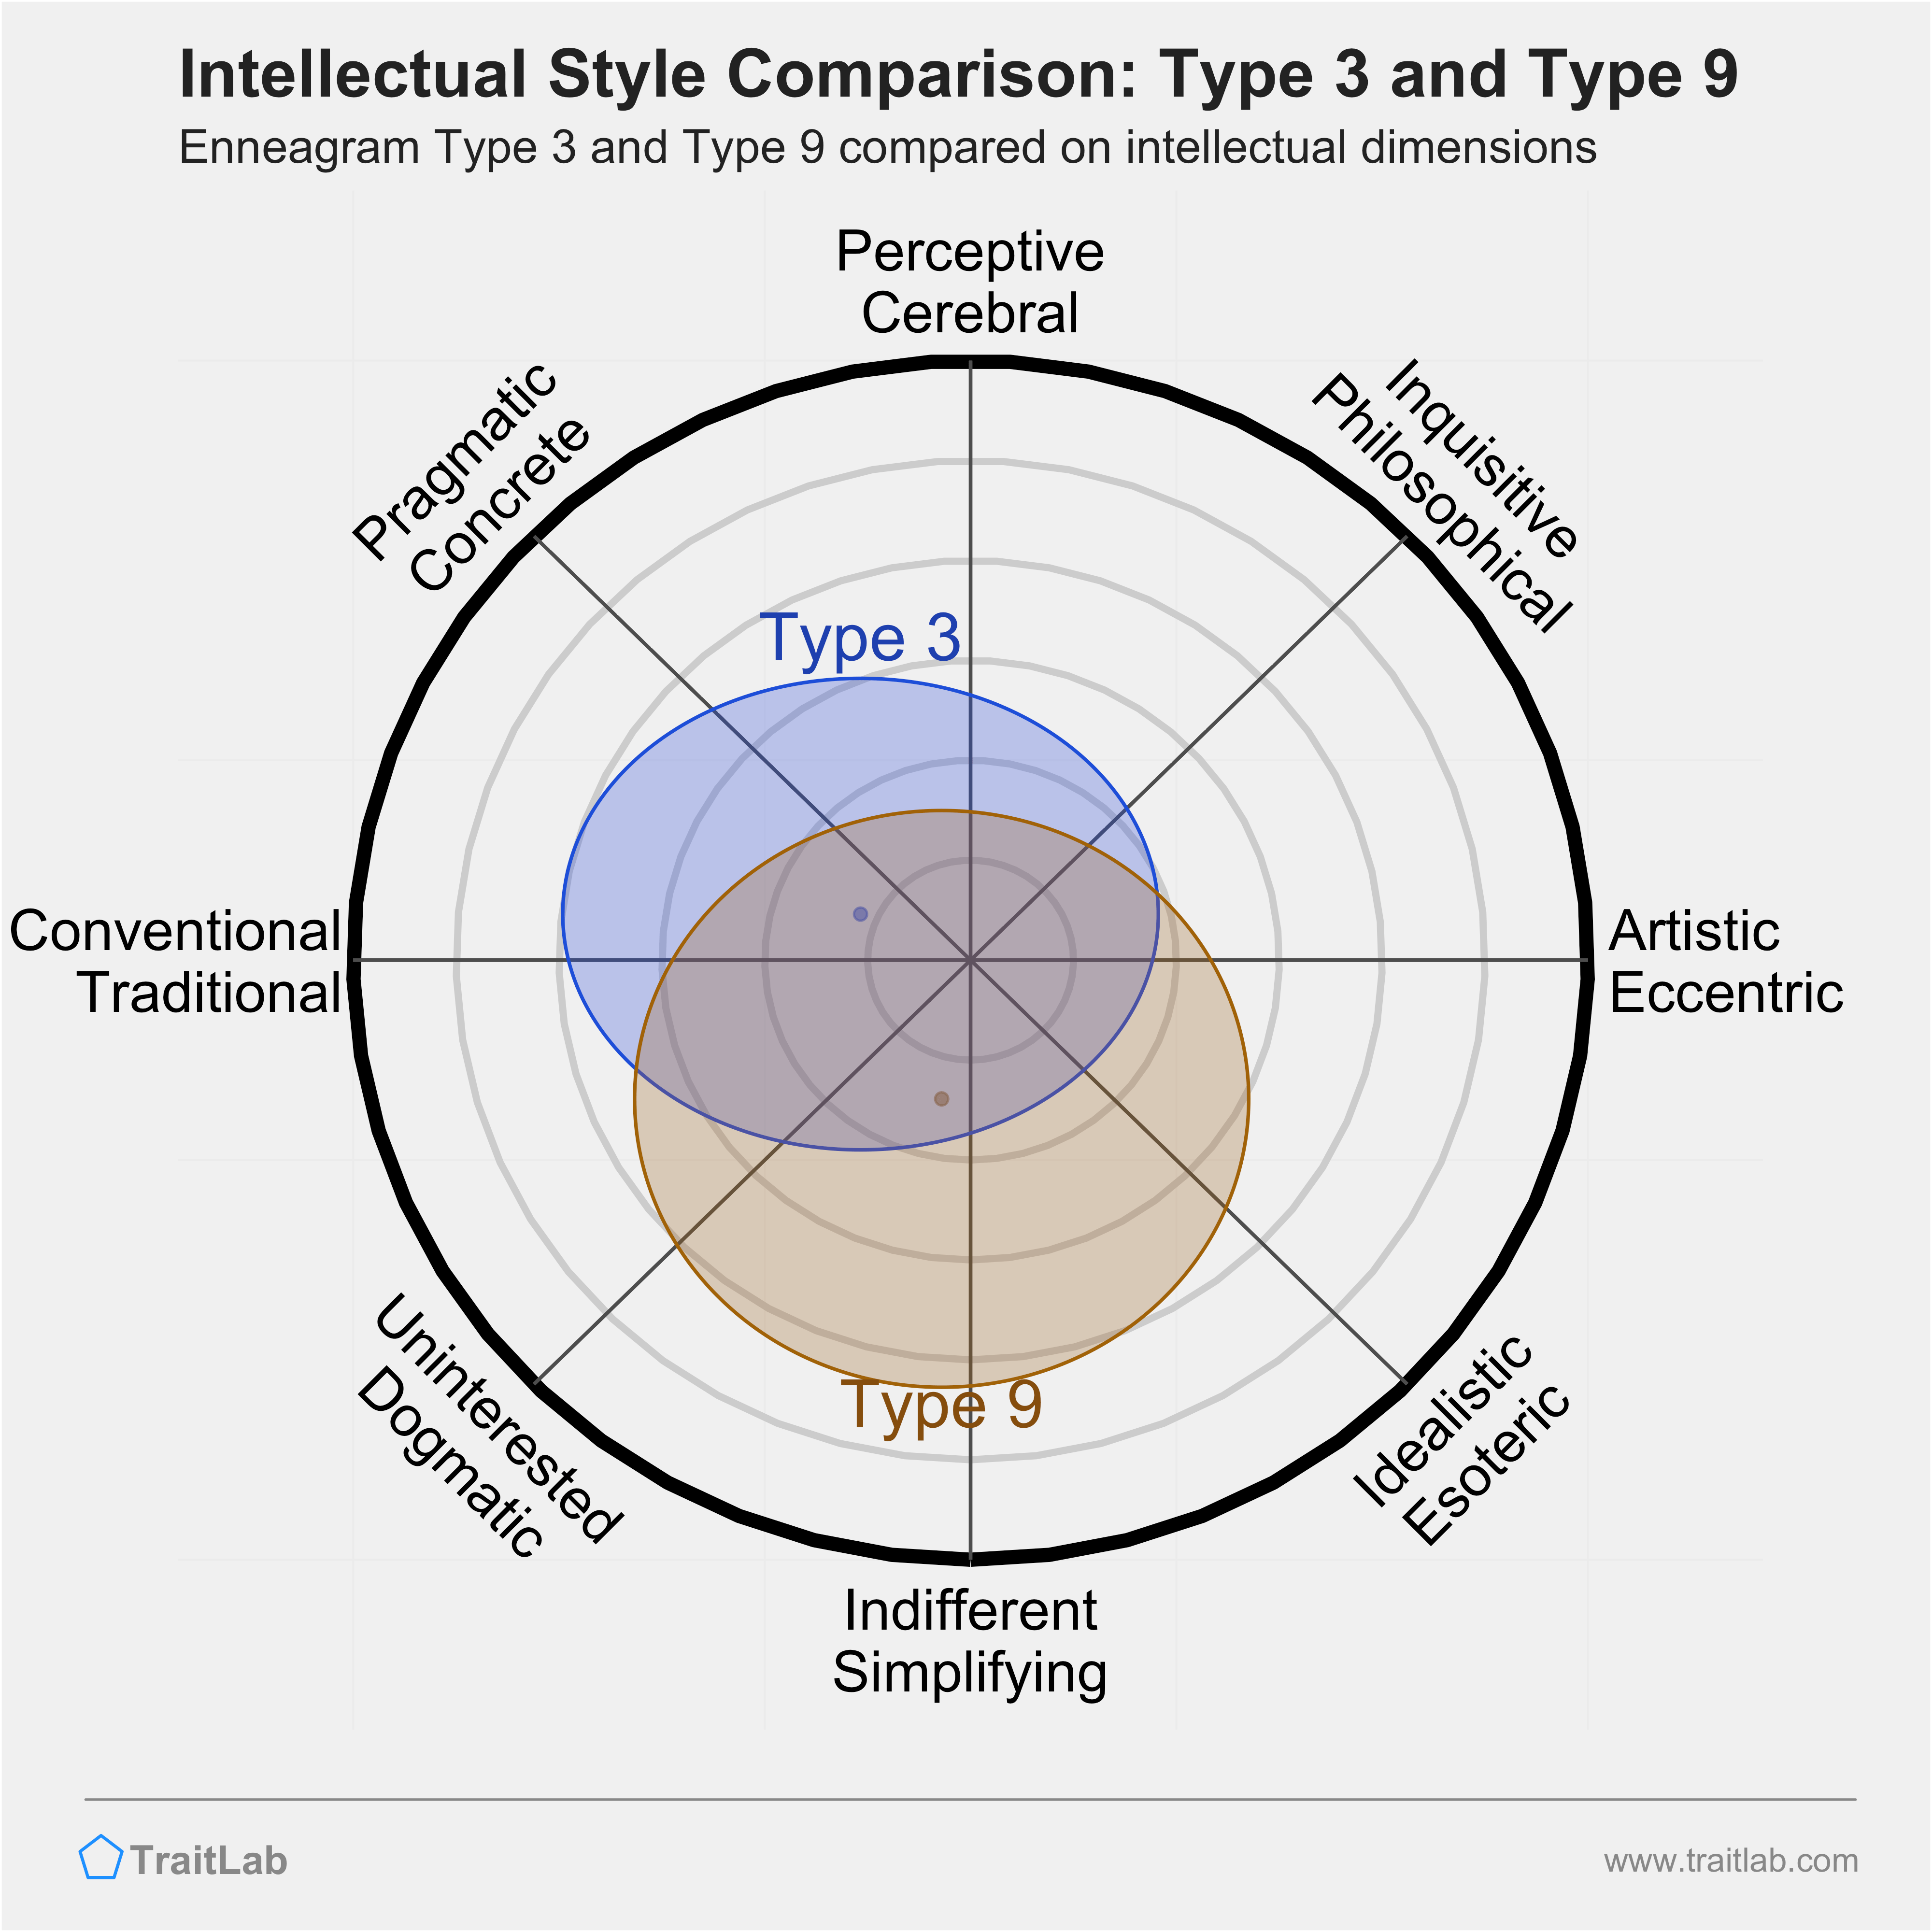 Type 3 and Type 9 comparison across intellectual dimensions